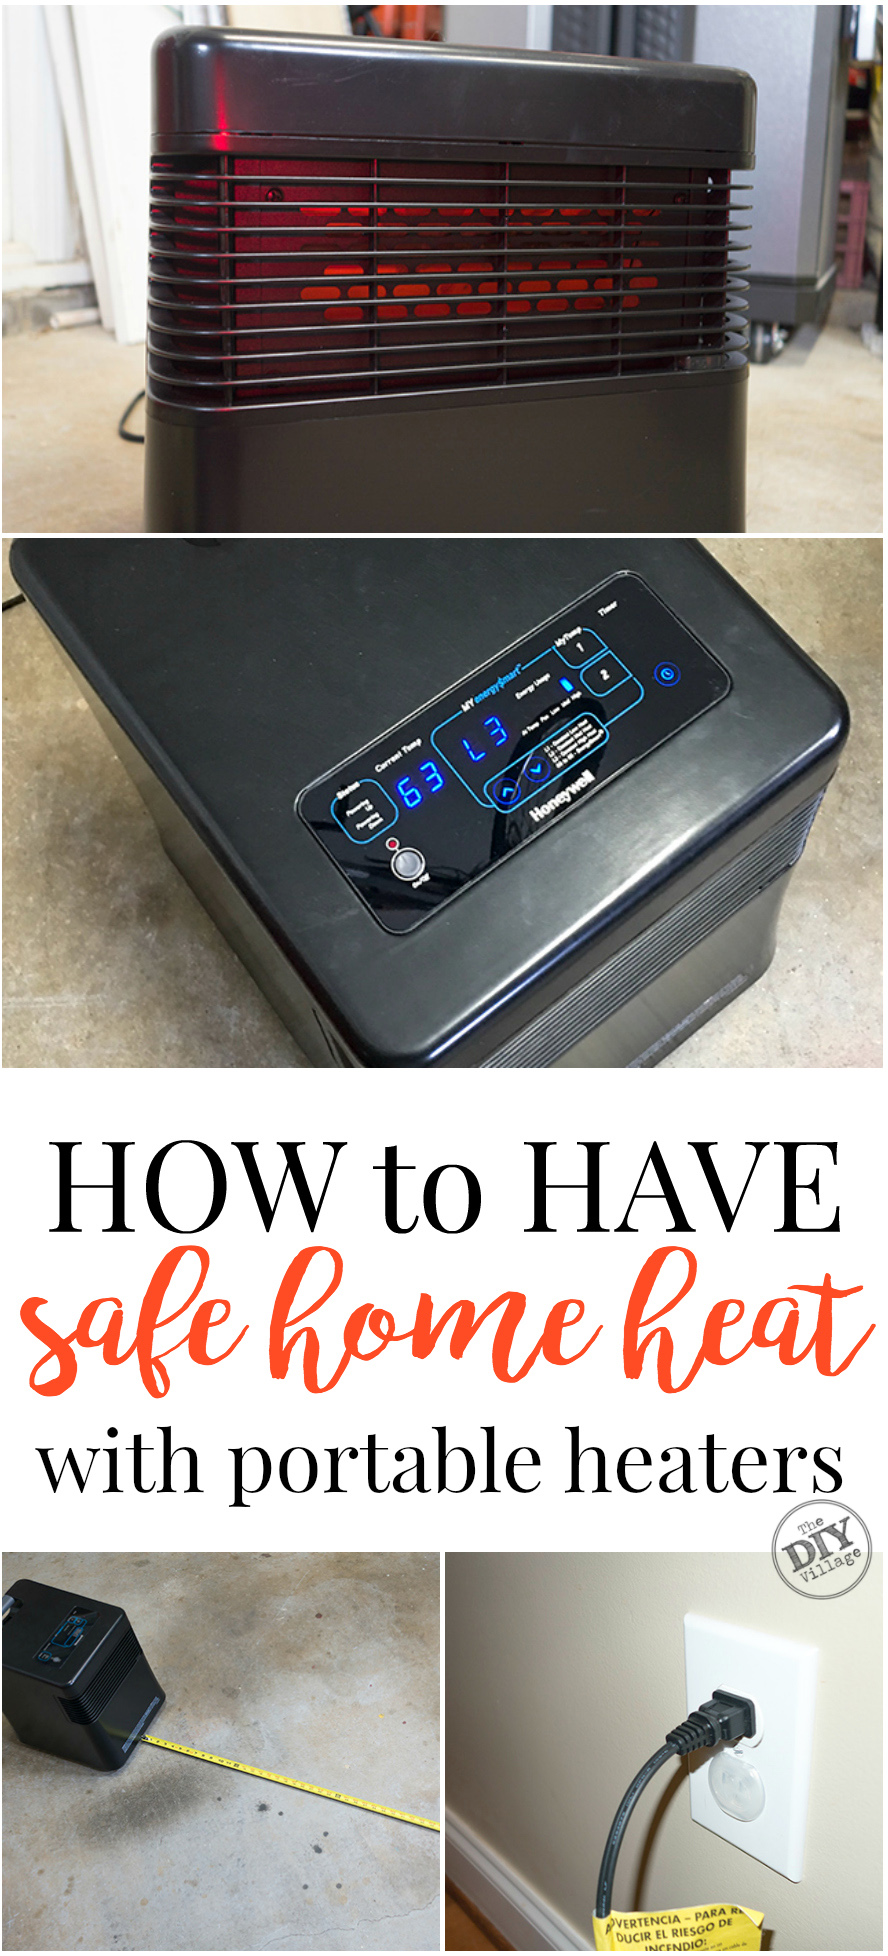 Safe home heat is a hugely important during the winter months when the use of secondary heating sources is higher. Be smart and safe about your use of portable heaters with some easy tips. 